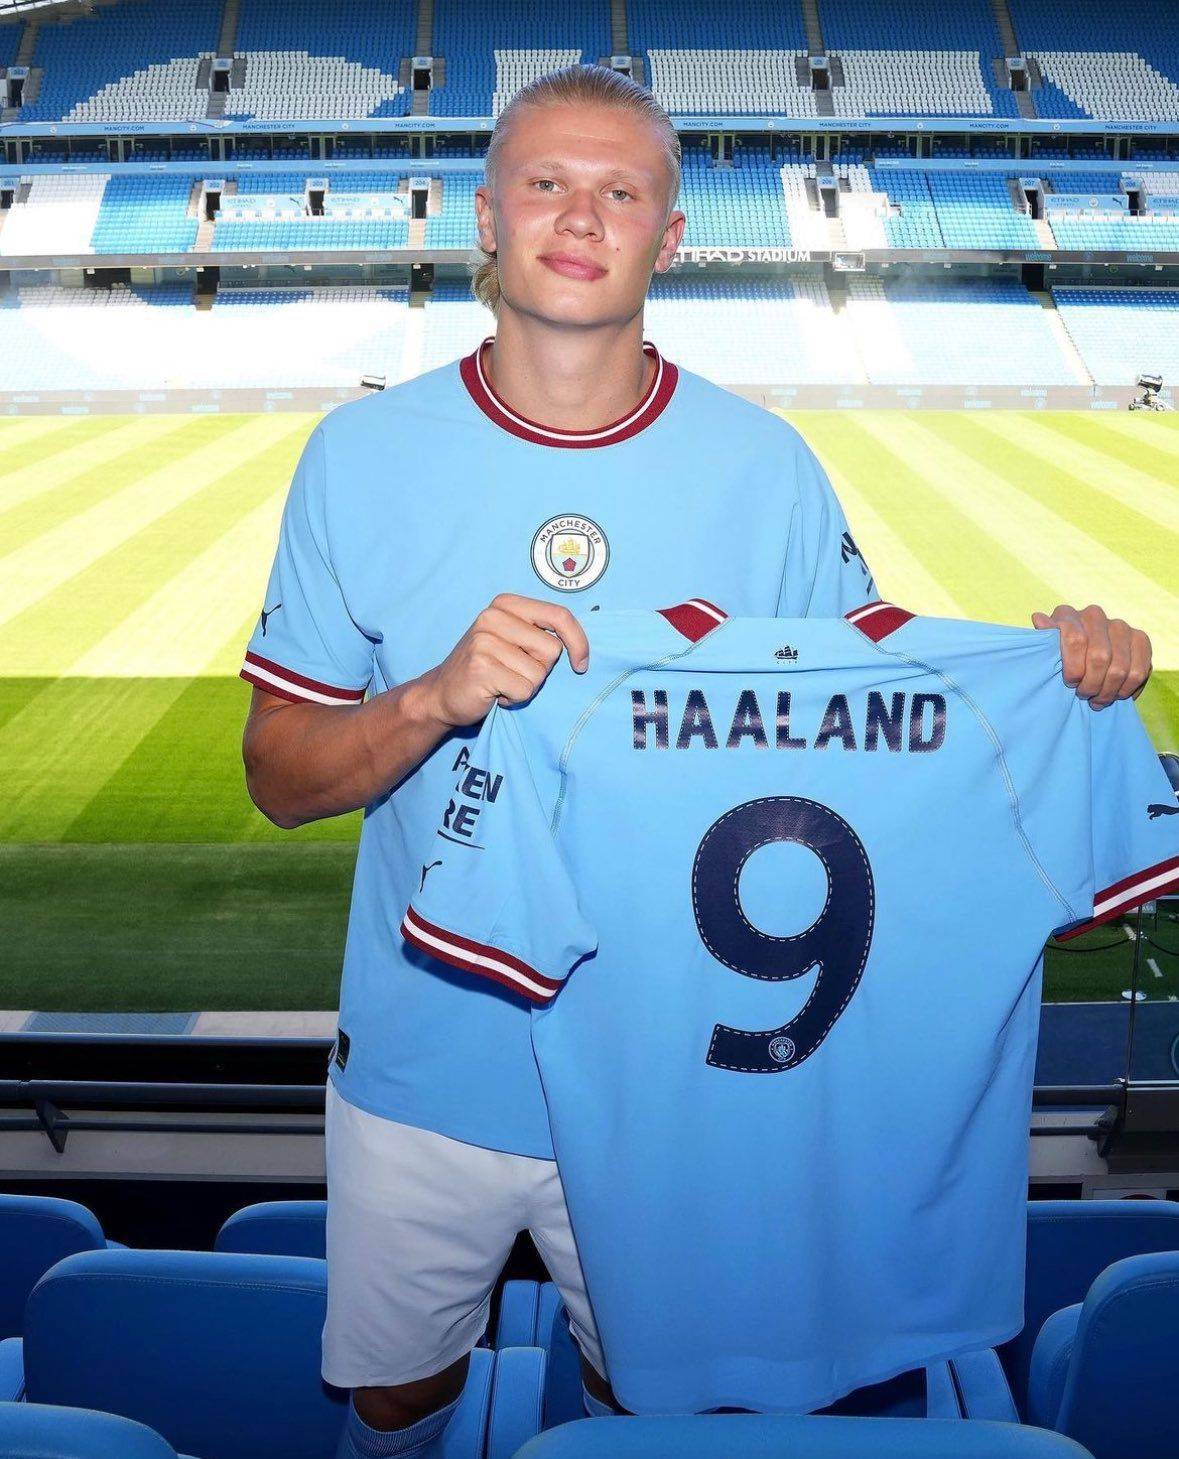 Two Years Ago Today: Haaland Signed for Manchester City, 90 Goals in 98 Games + 6 Trophies